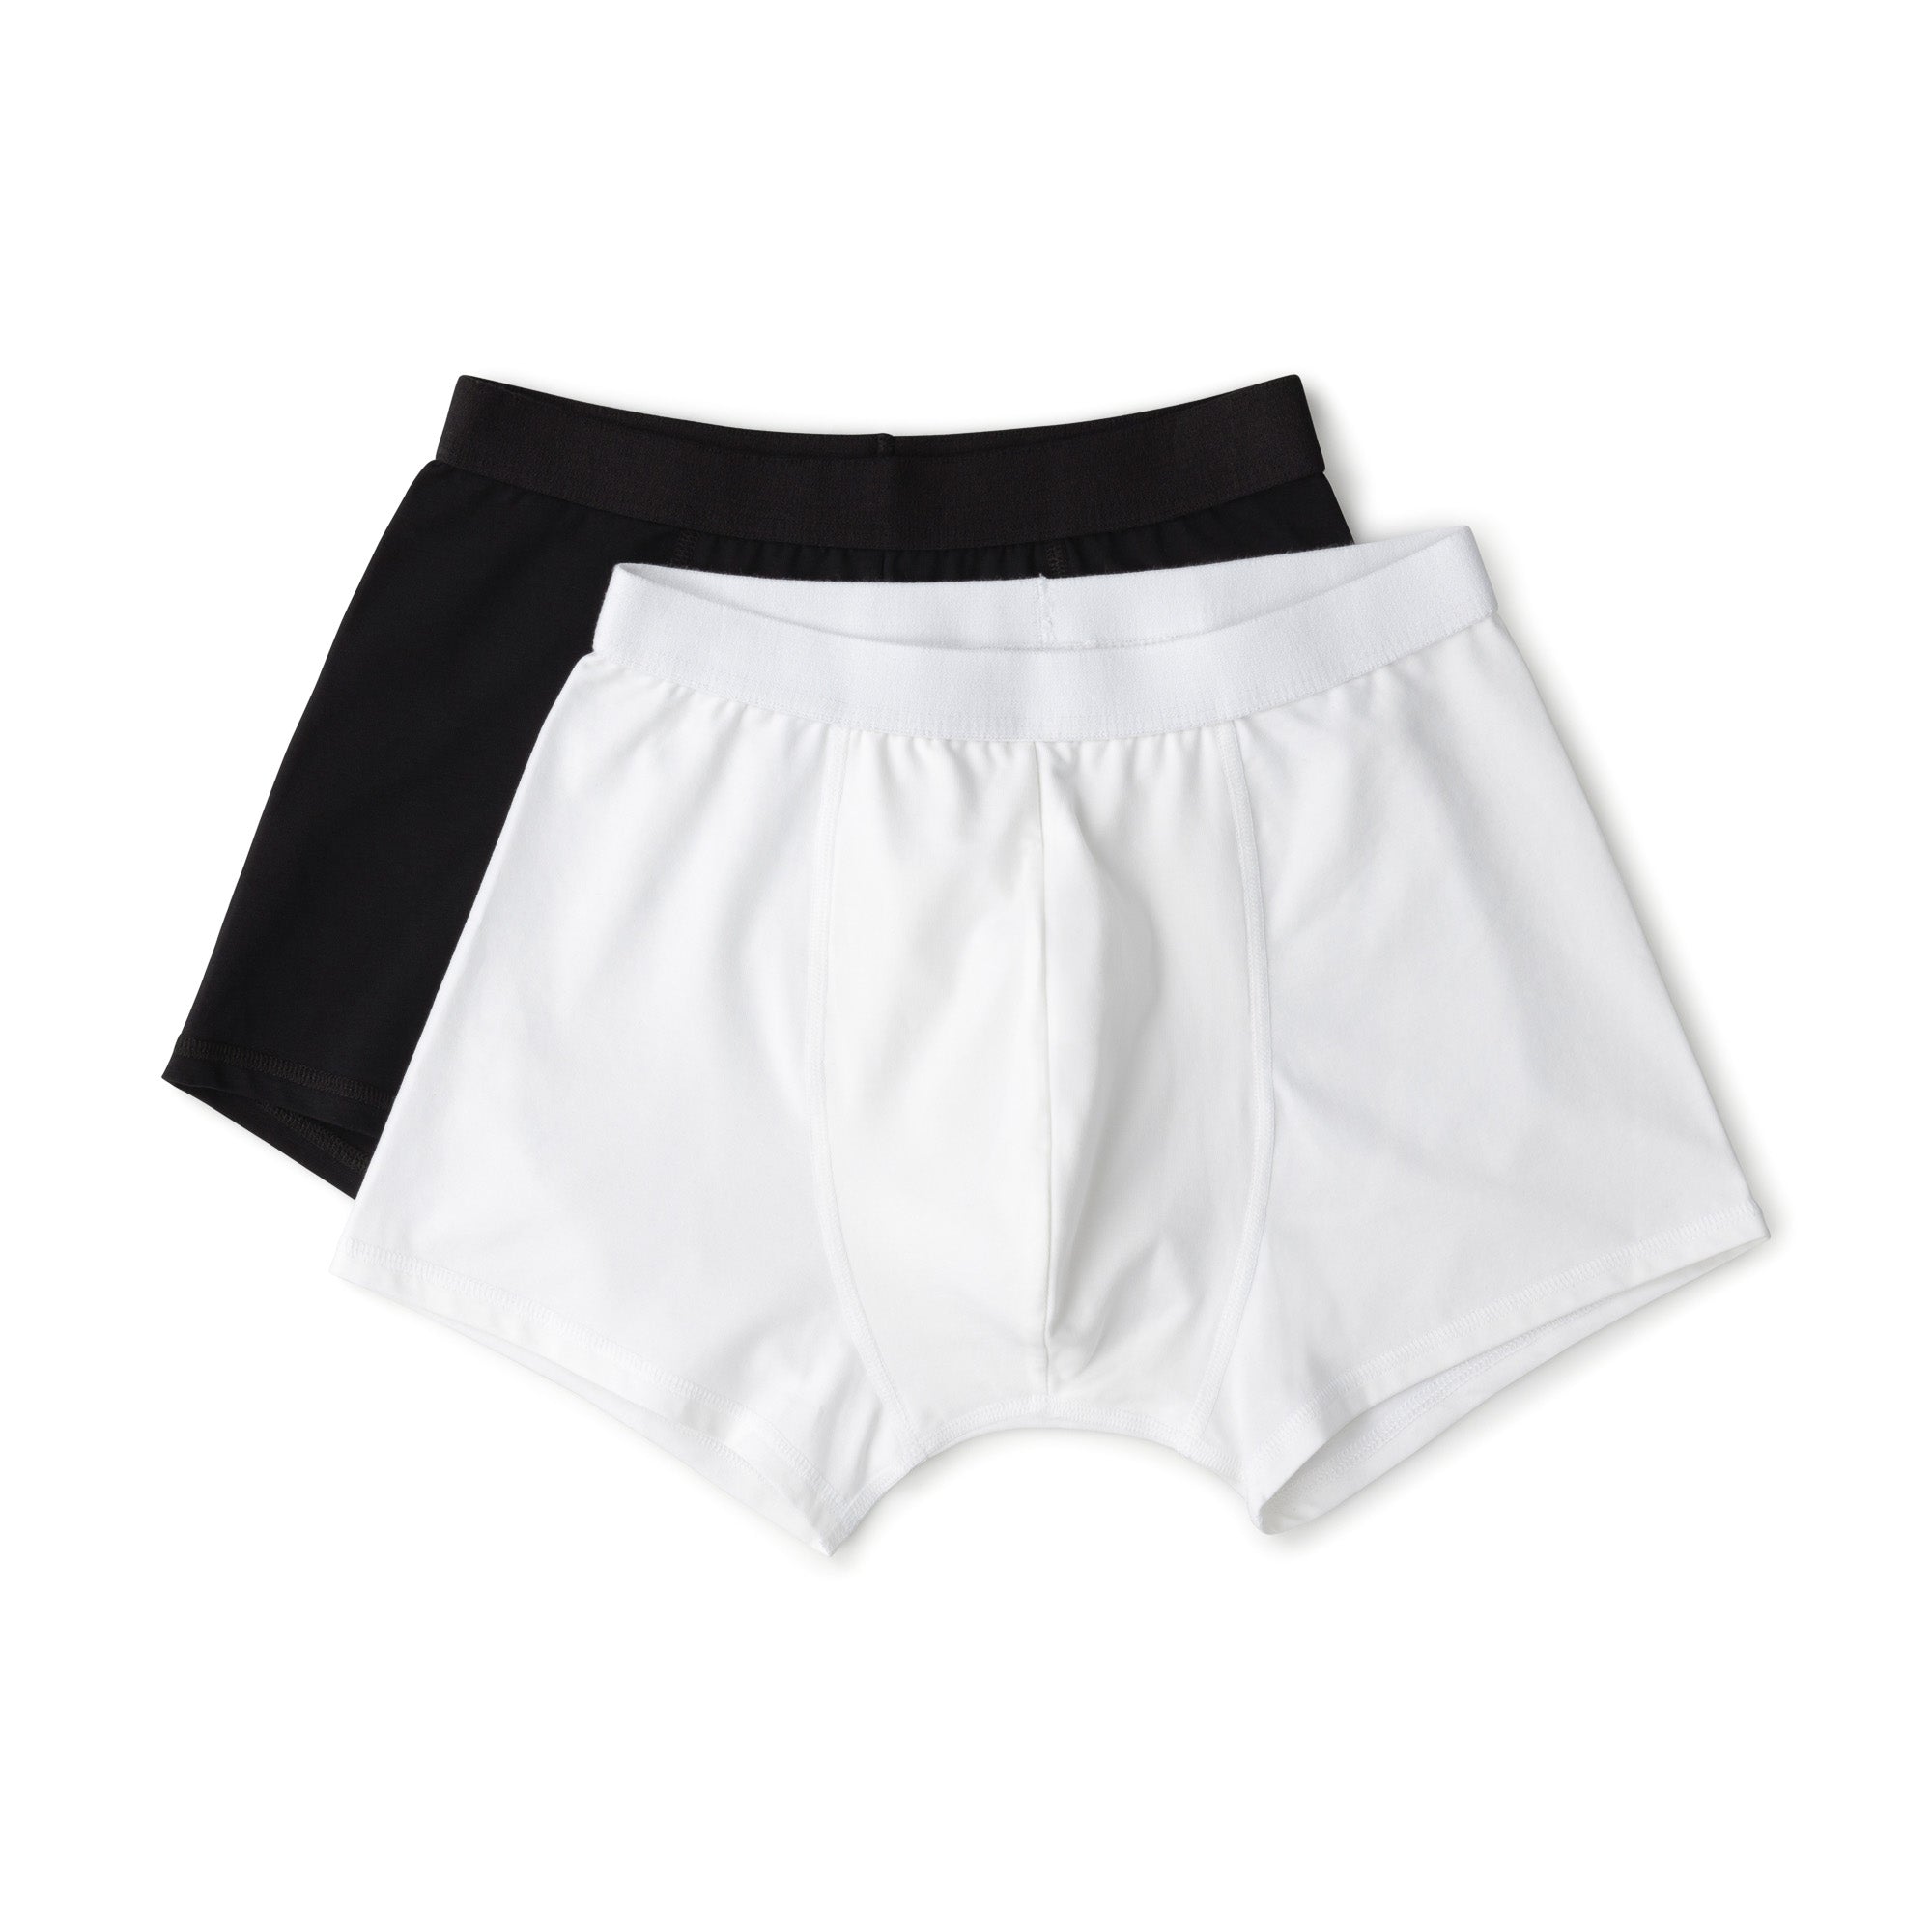 The 5 Boxer Brief  Recycled Materials